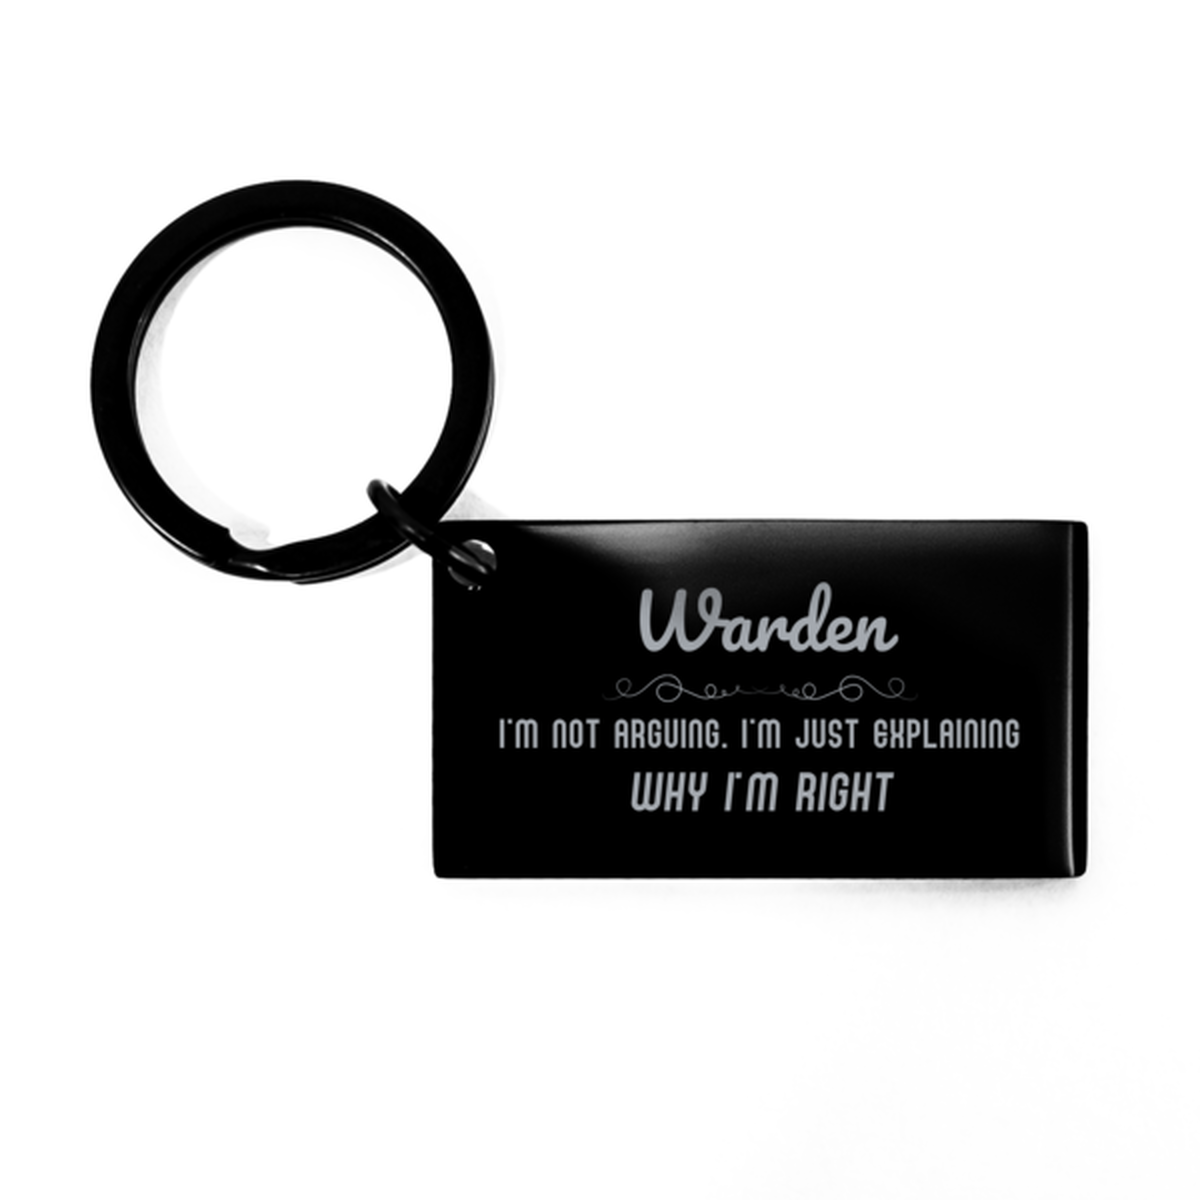 Warden I'm not Arguing. I'm Just Explaining Why I'm RIGHT Keychain, Funny Saying Quote Warden Gifts For Warden Graduation Birthday Christmas Gifts for Men Women Coworker